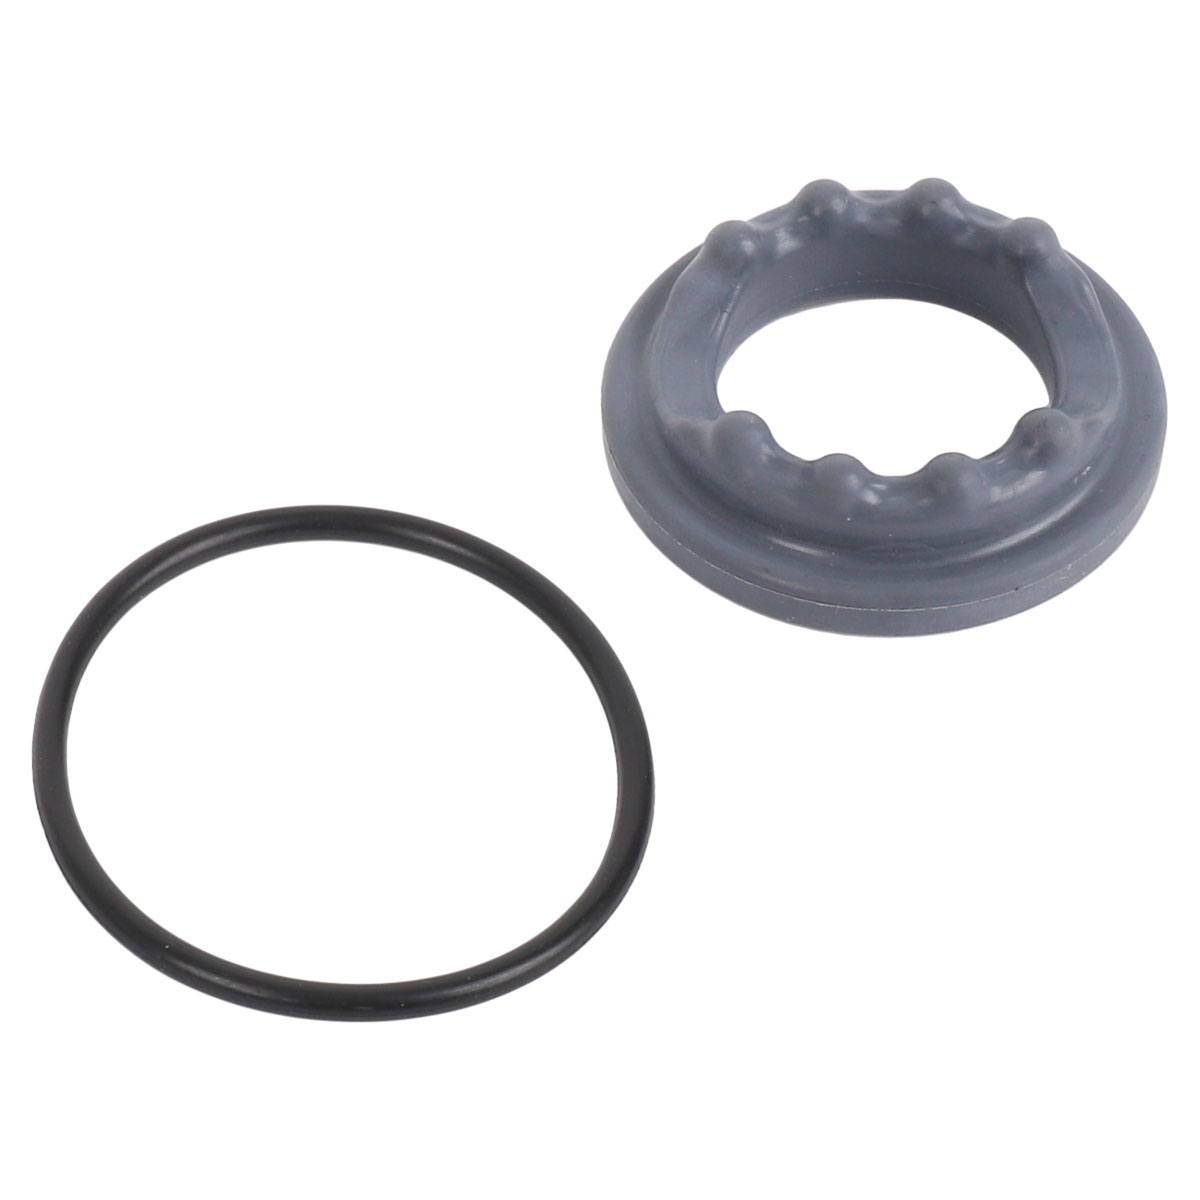 Picture of Formula Sealing head / Sealing Kit for MOD Rear Shock - AM40022-00